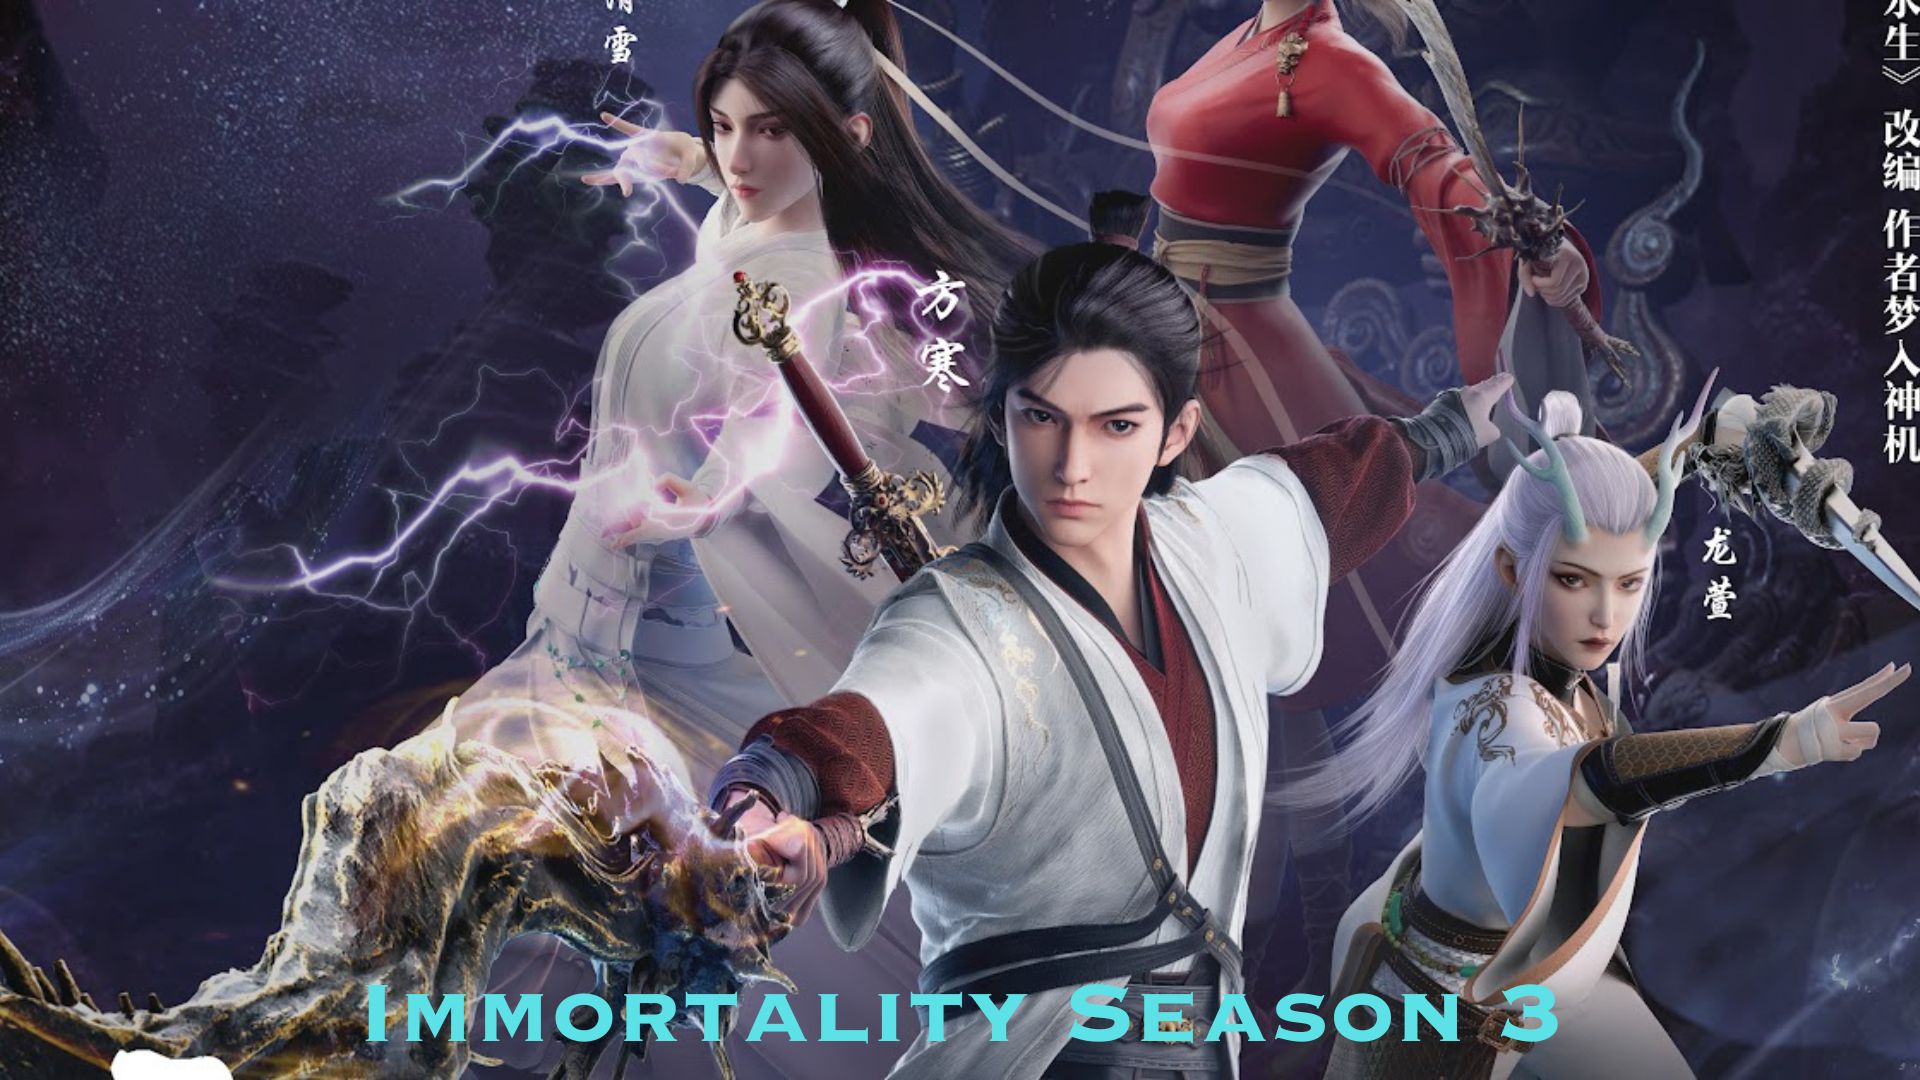 Immortality Season 3 release date Announced | details, reviews